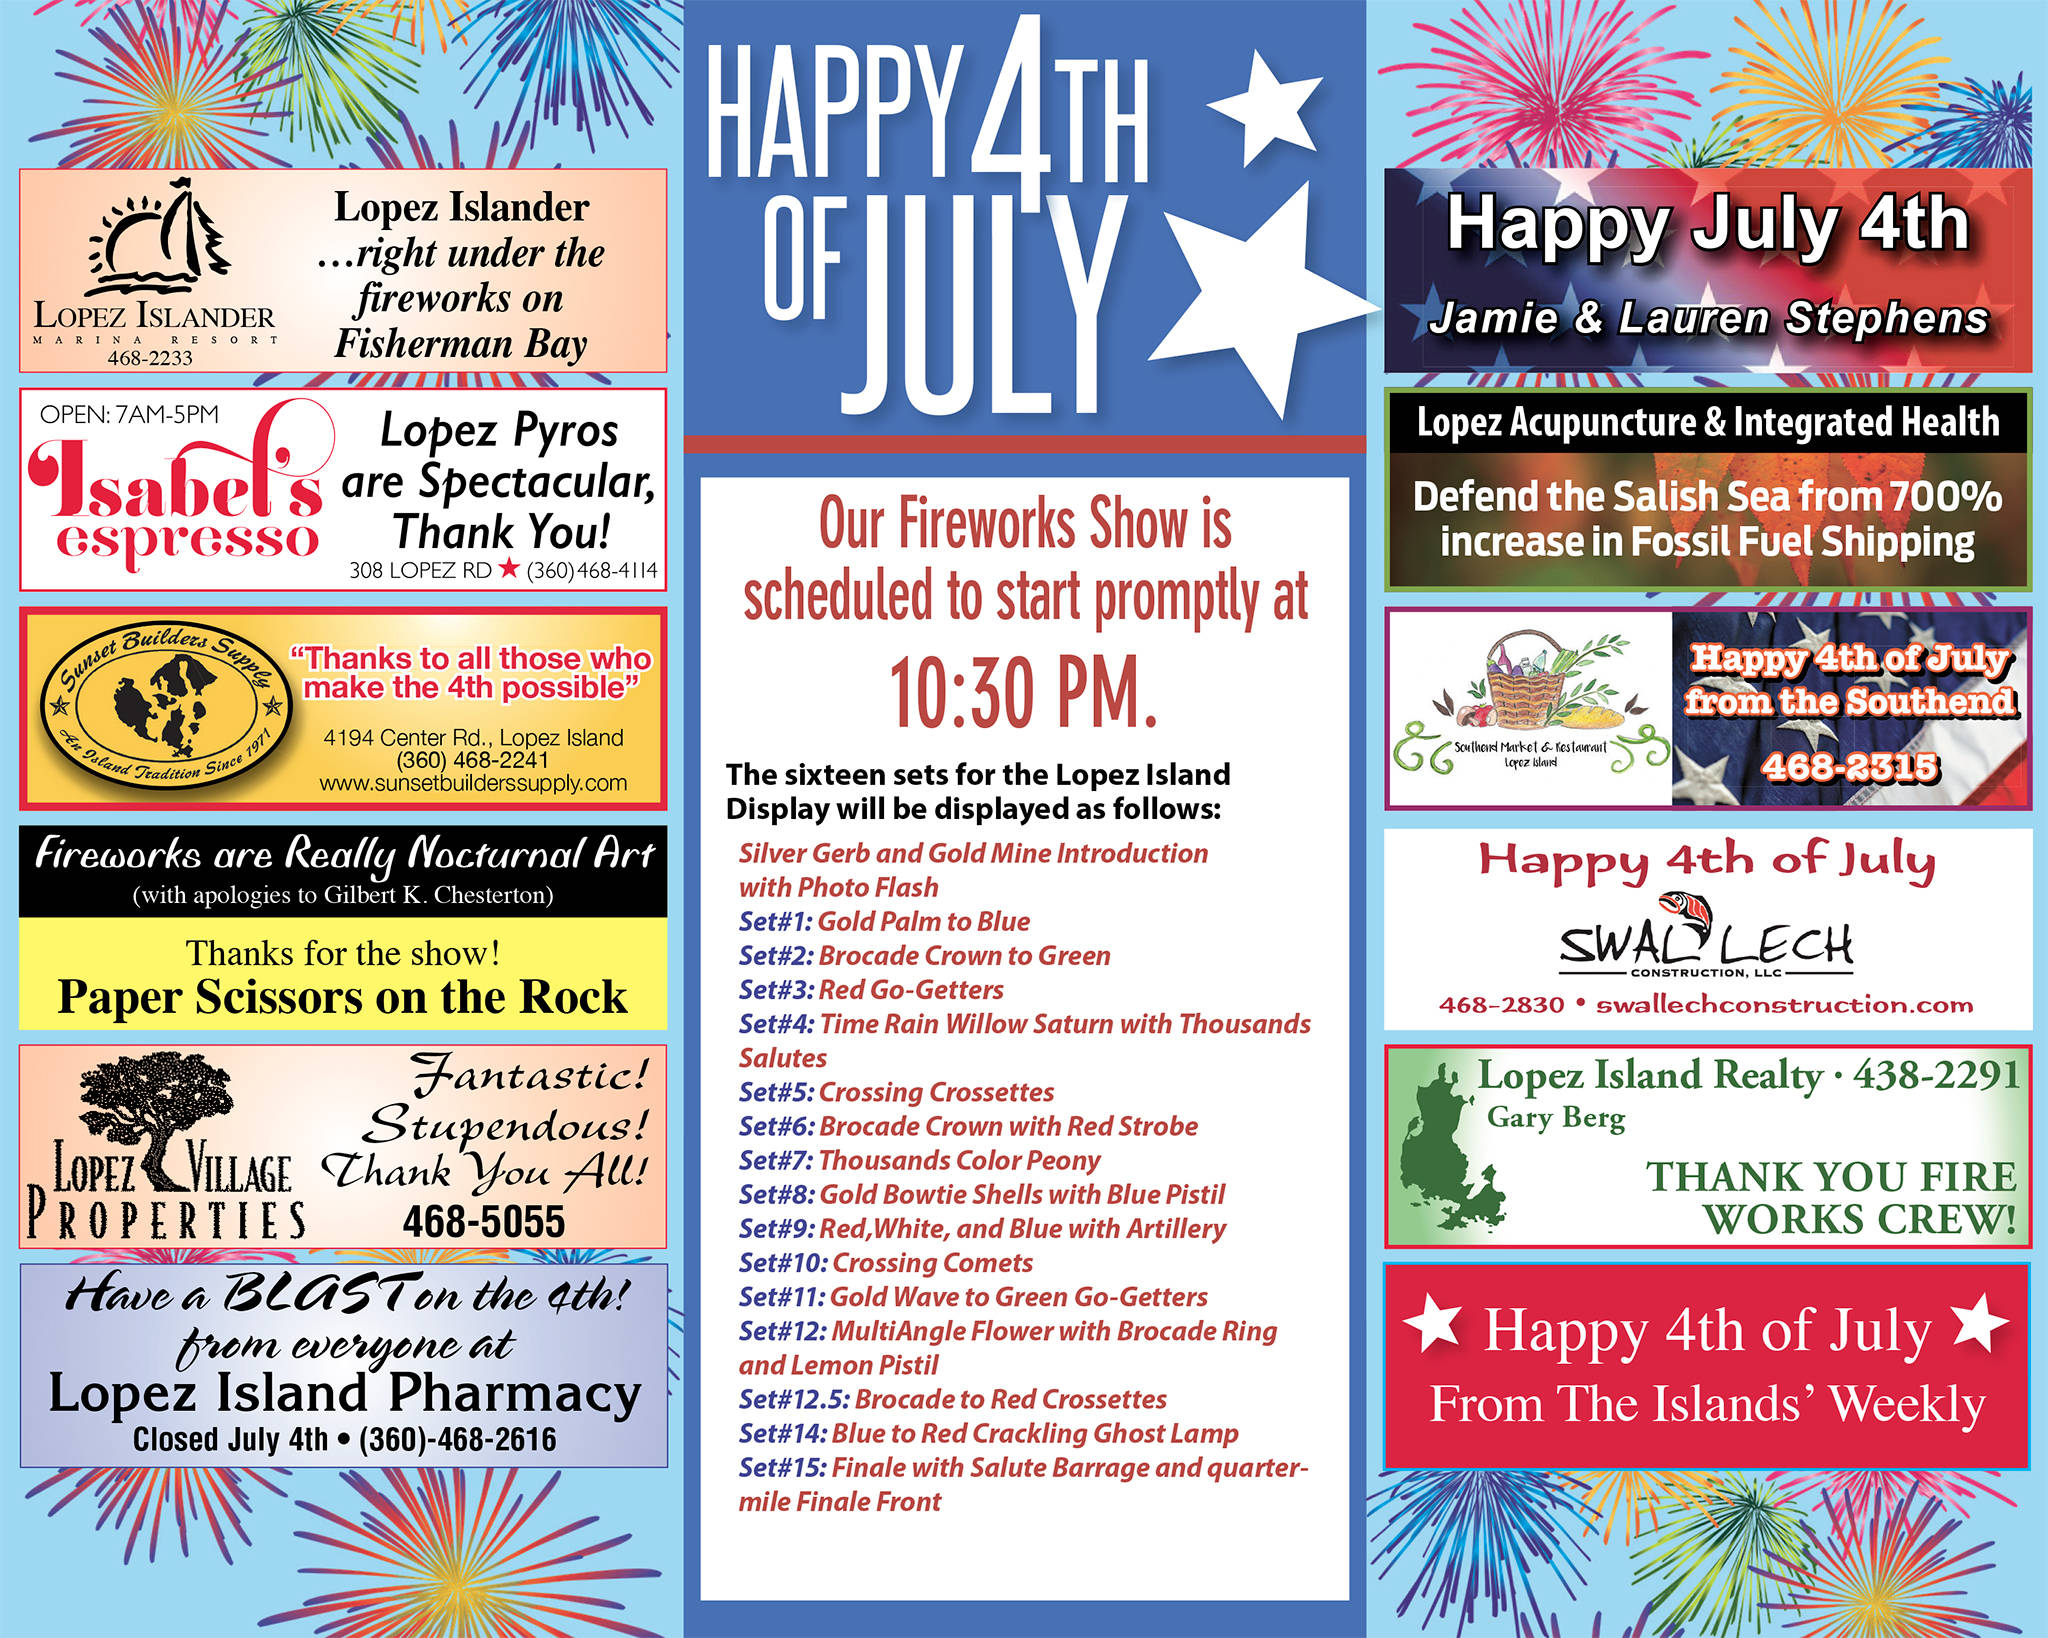 Prepare for a fun Fourth of July on Lopez Island